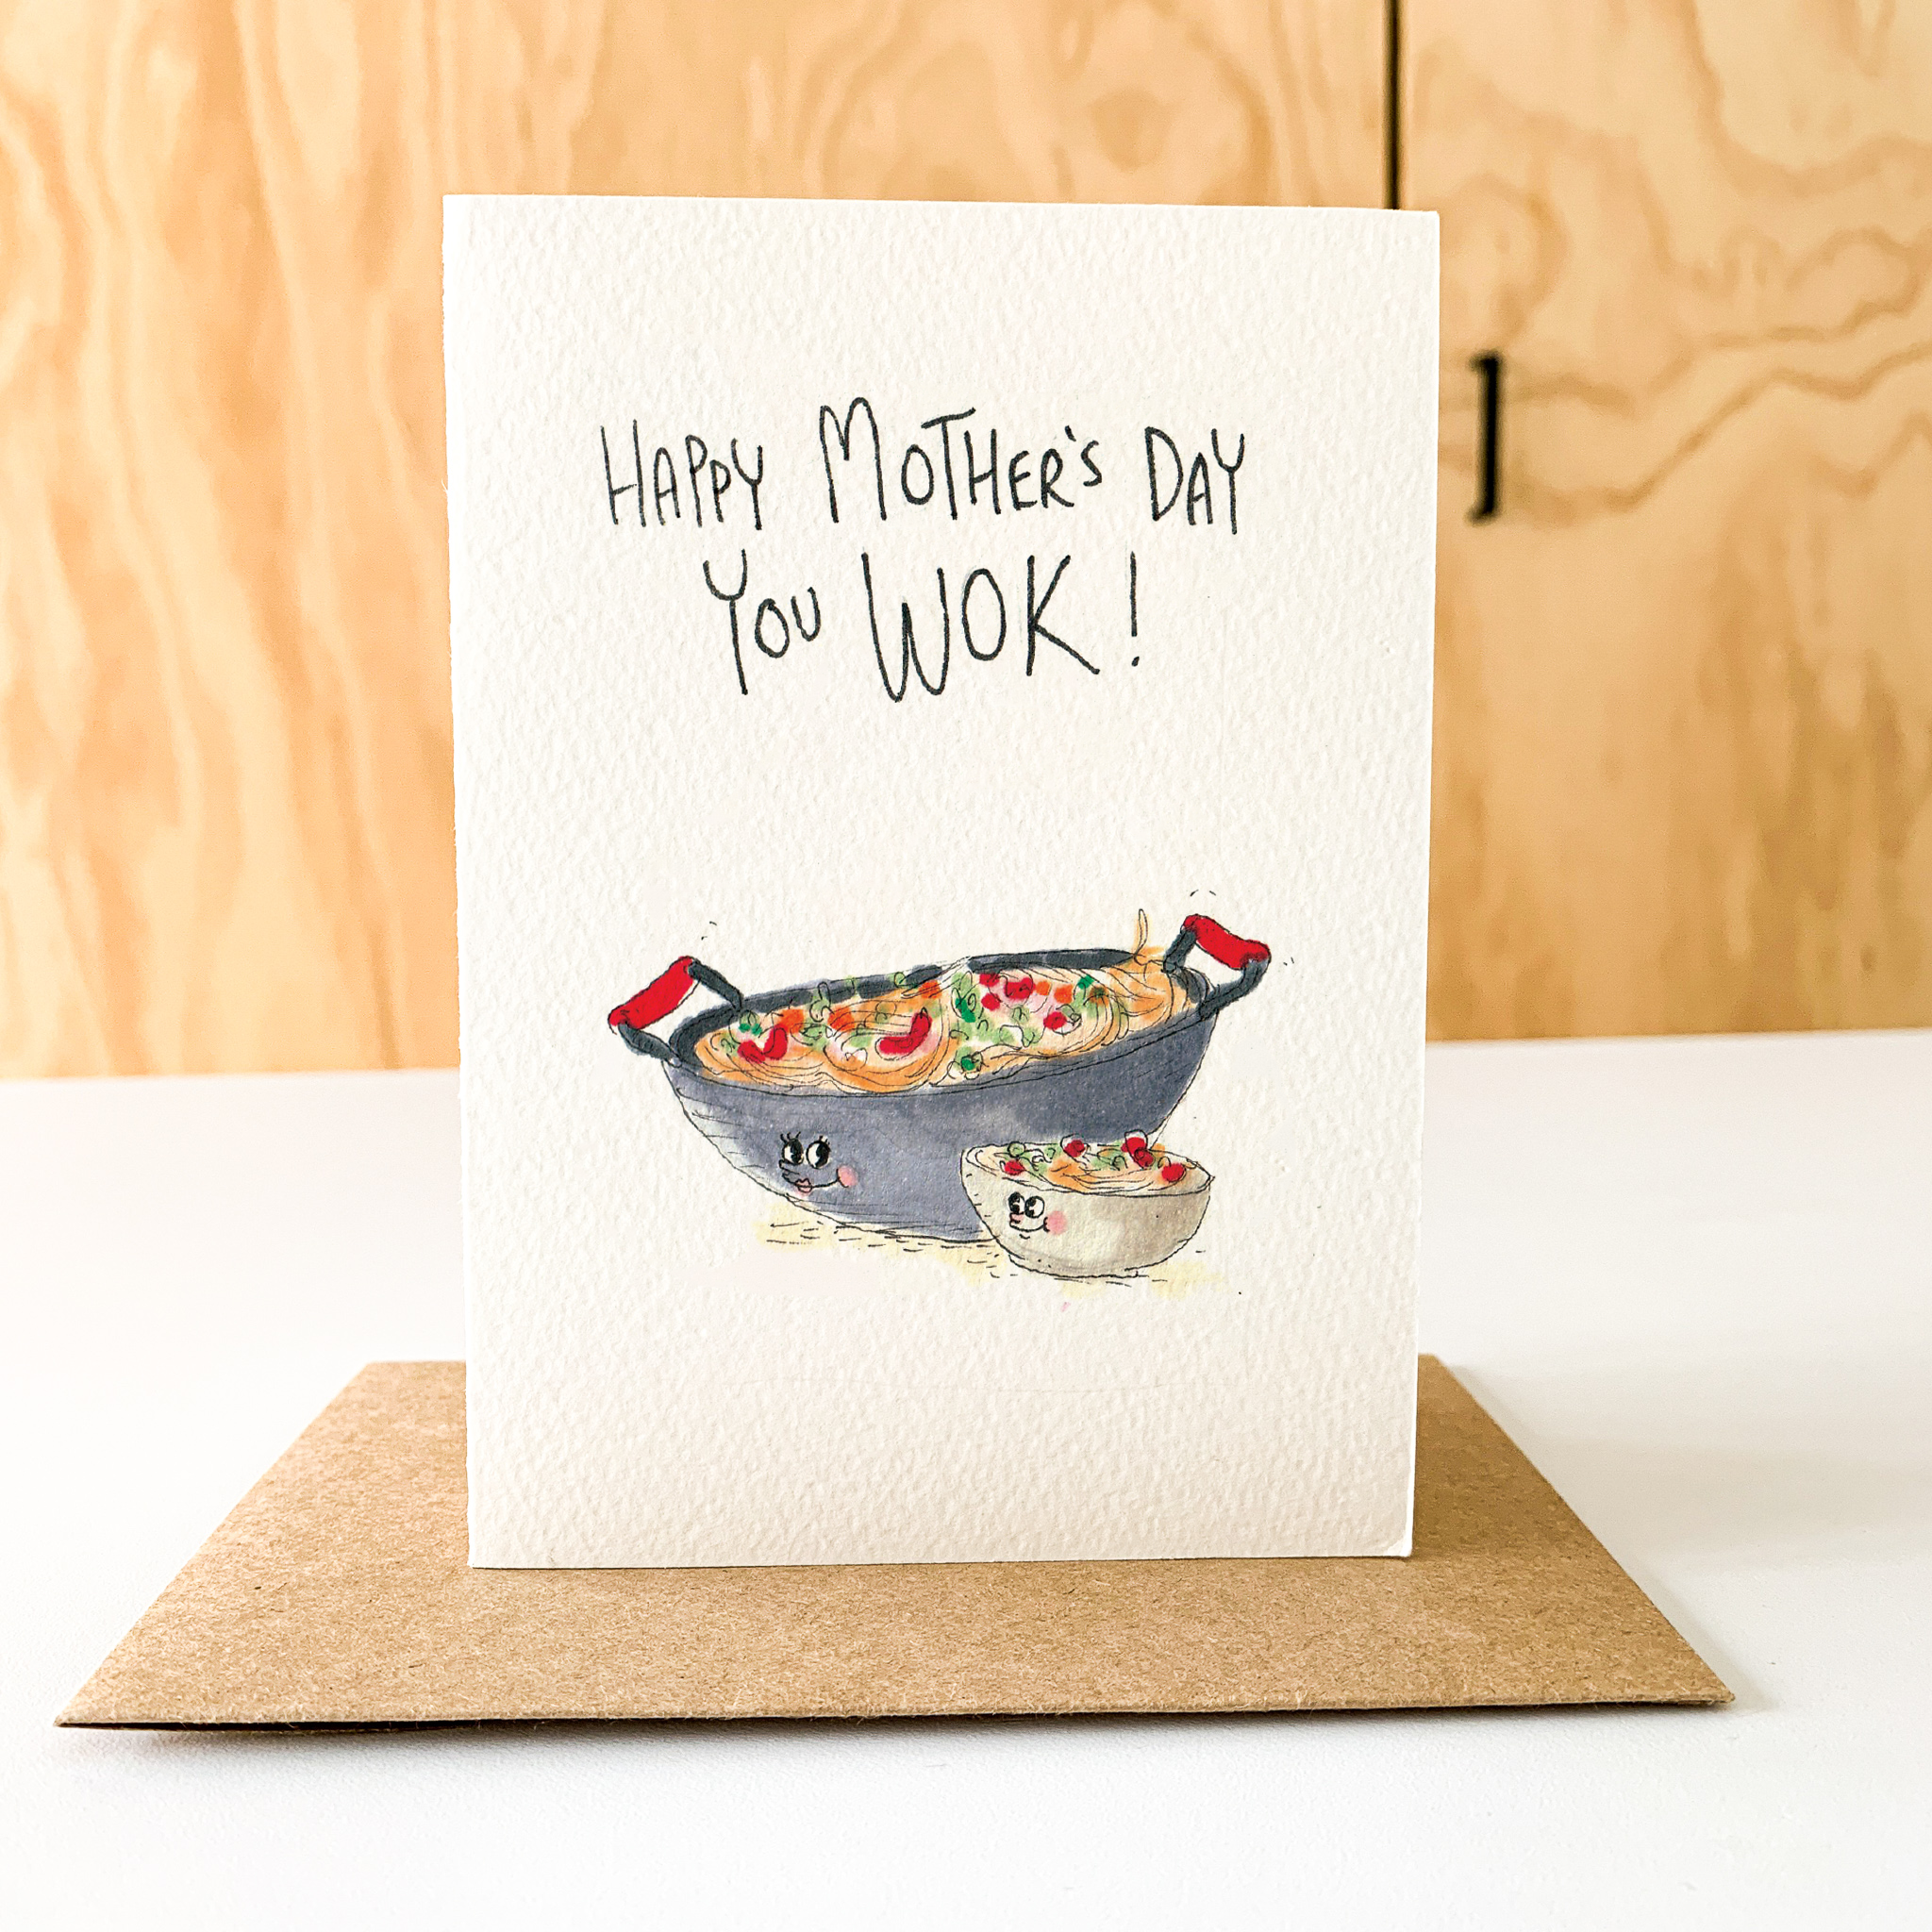 Happy Mother’s Day, You Wok